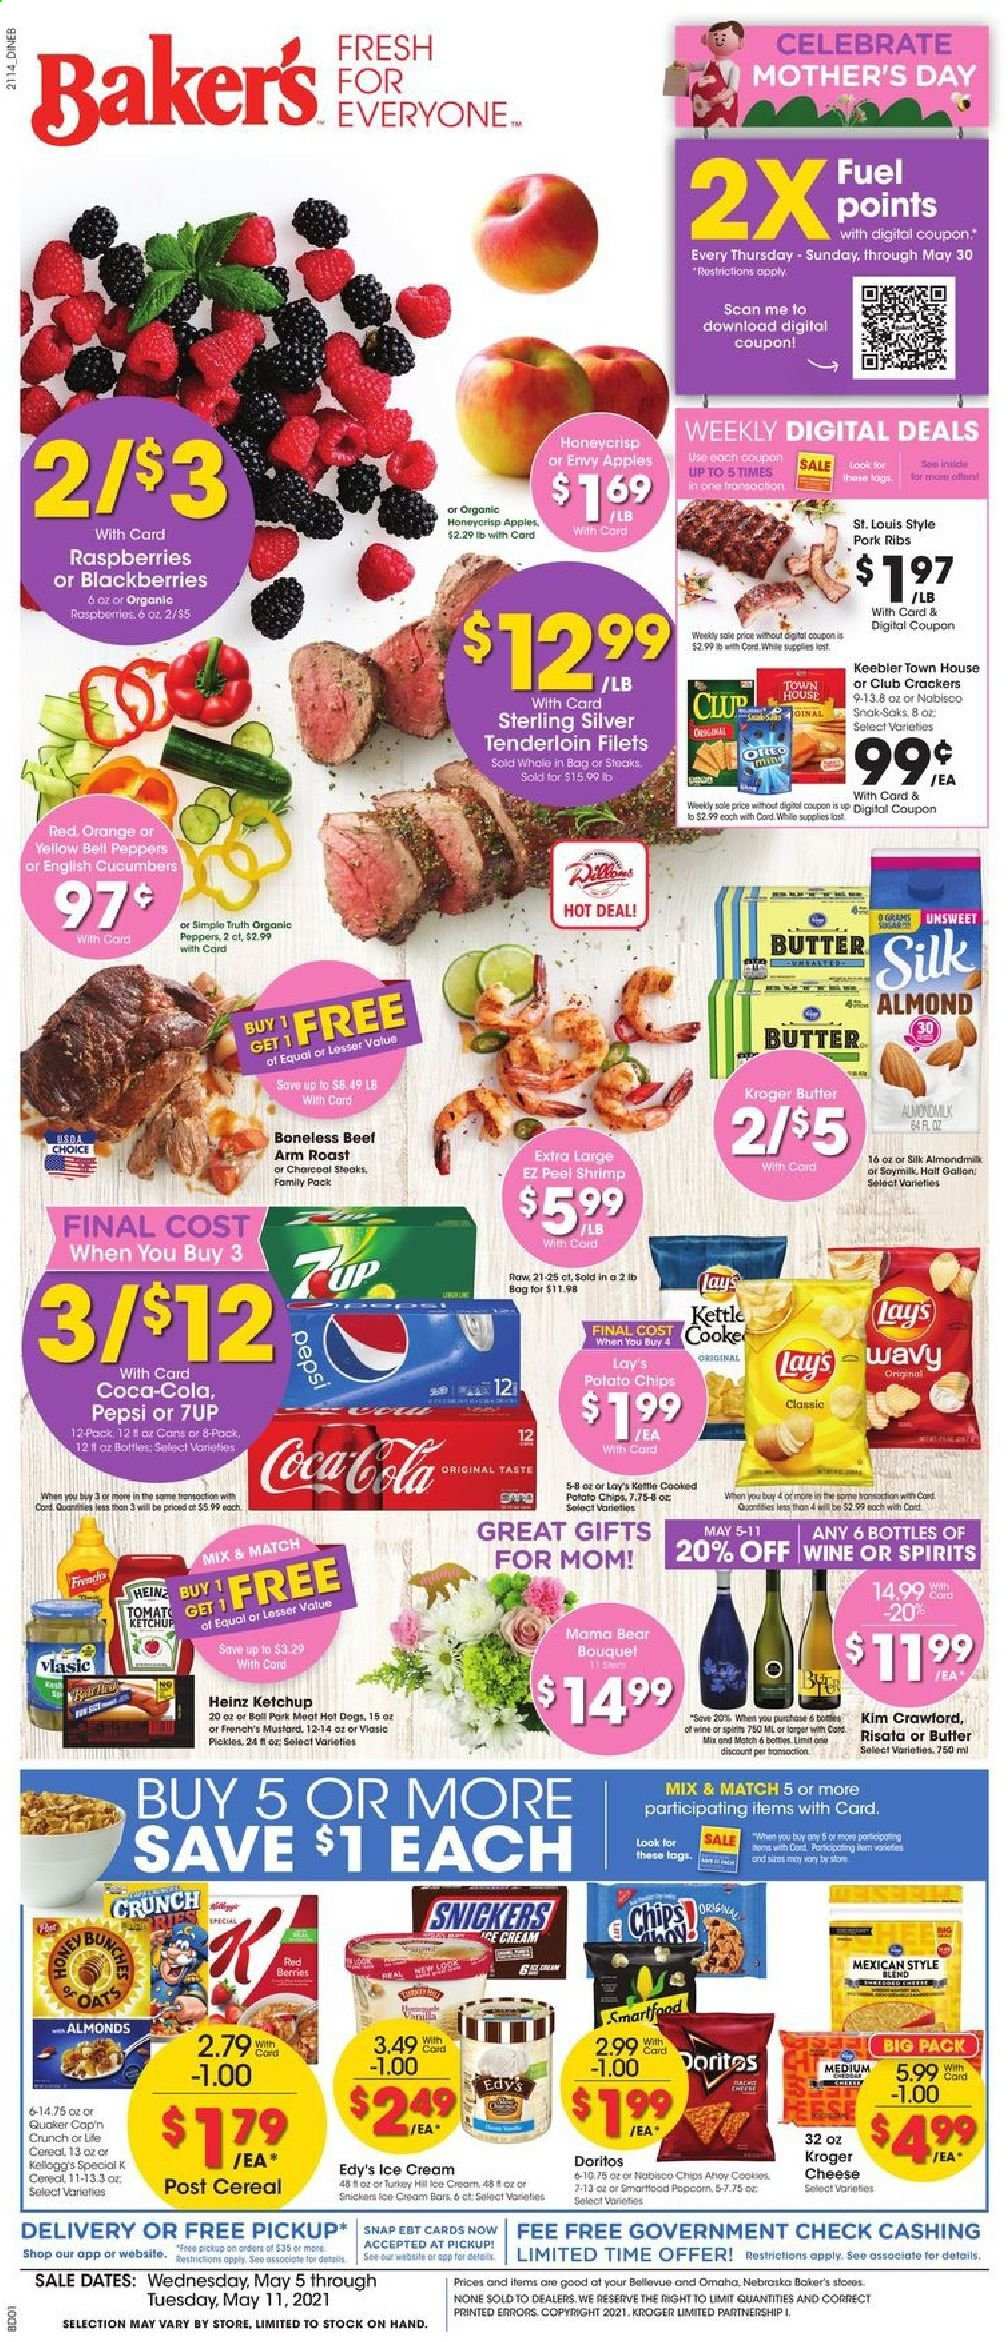 thumbnail - Baker's Flyer - 05/05/2021 - 05/11/2021 - Sales products - bell peppers, cucumber, apples, blackberries, raspberries, oranges, shrimps, Quaker, Oreo, almond milk, Silk, butter, ice cream, cookies, Snickers, crackers, Kellogg's, Keebler, Doritos, potato chips, chips, Lay’s, Smartfood, sugar, oats, Heinz, cereals, Cap'n Crunch, mustard, ketchup, Coca-Cola, Pepsi, 7UP, L'Or, wine, steak, pork meat, pork ribs, Bakers, gallon, bouquet. Page 1.